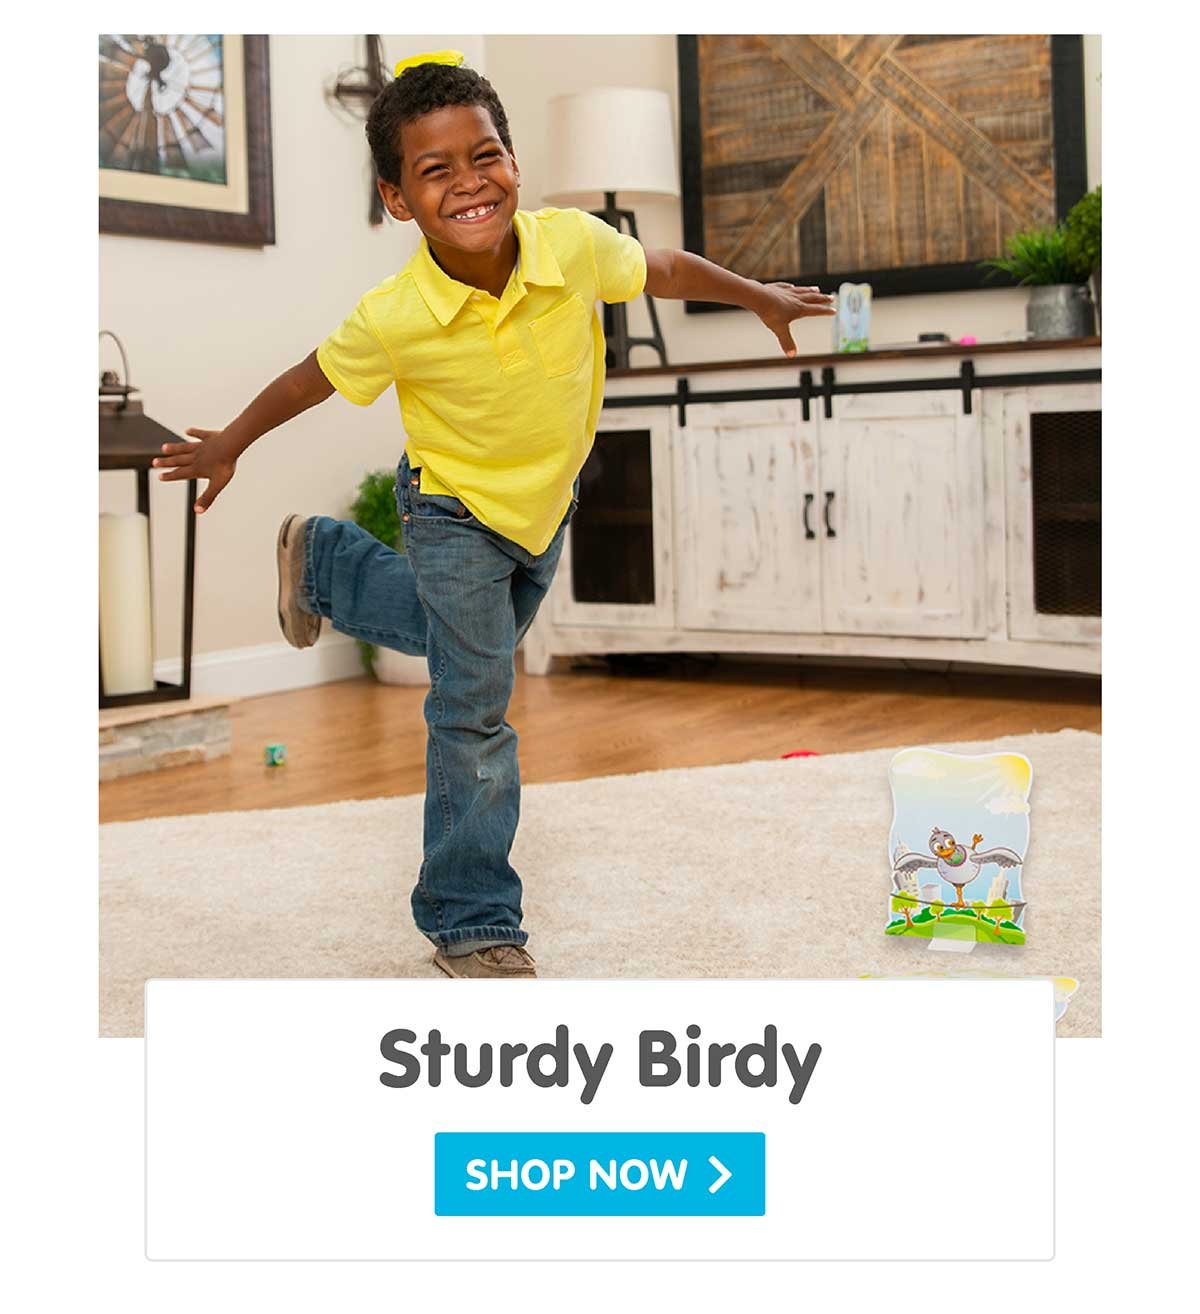 Sturdy Birdy: The Perfect Game of Perfect Balance